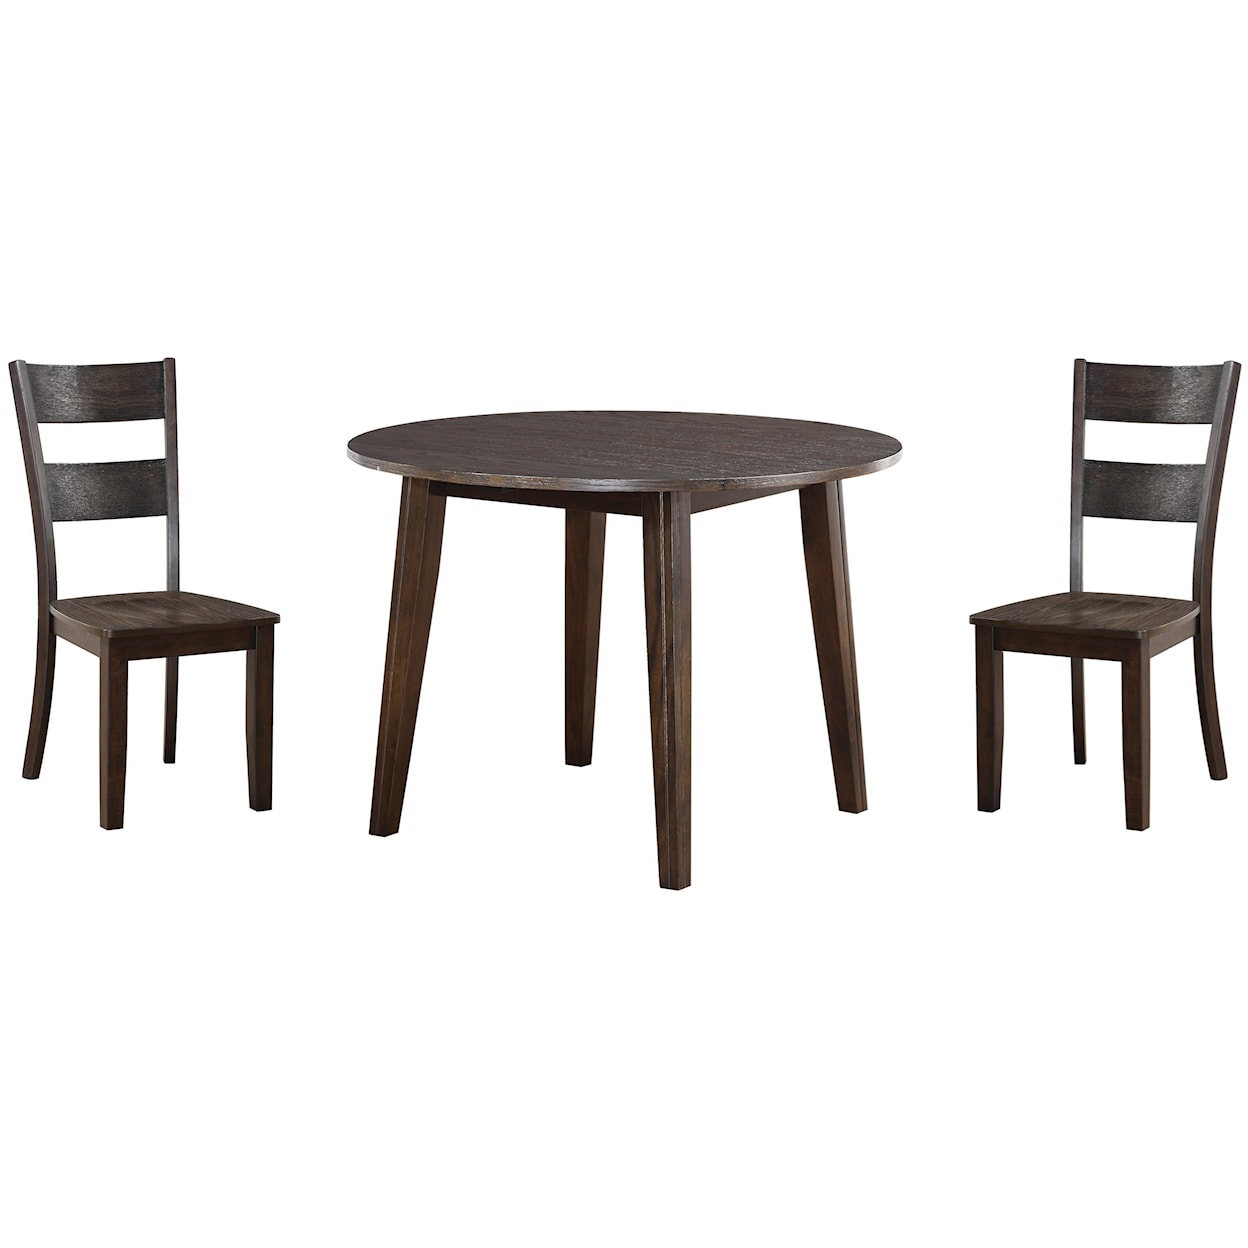 Holland House 8204 3 Piece Table and Chair Set